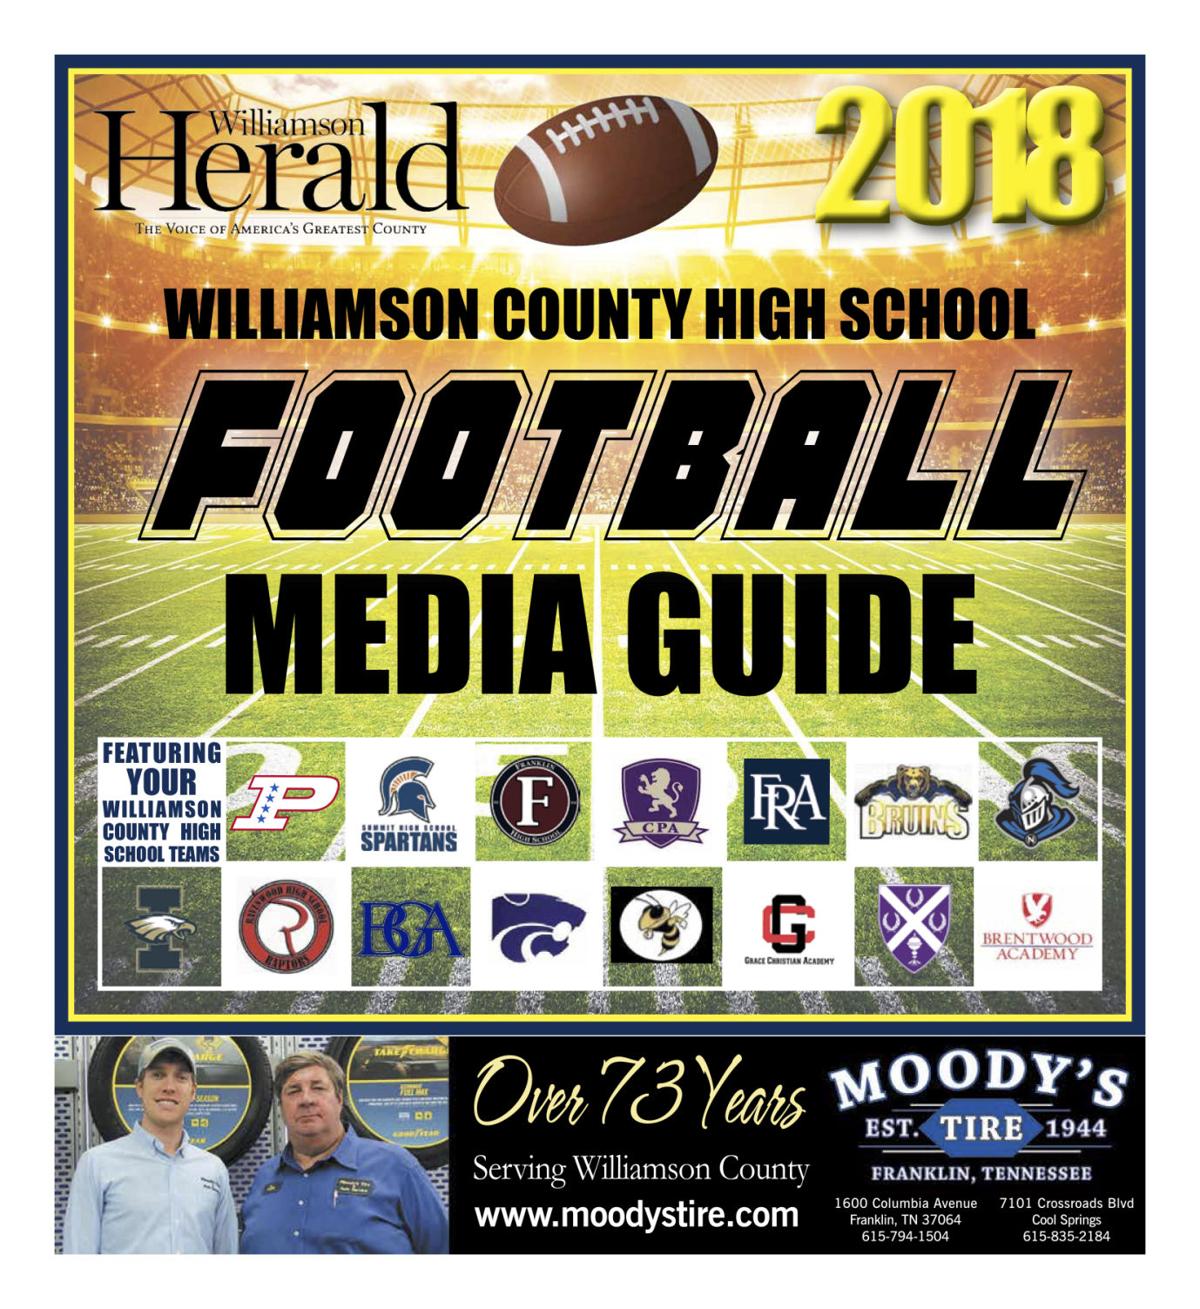 Annual High School Football Media Guide to be released this week